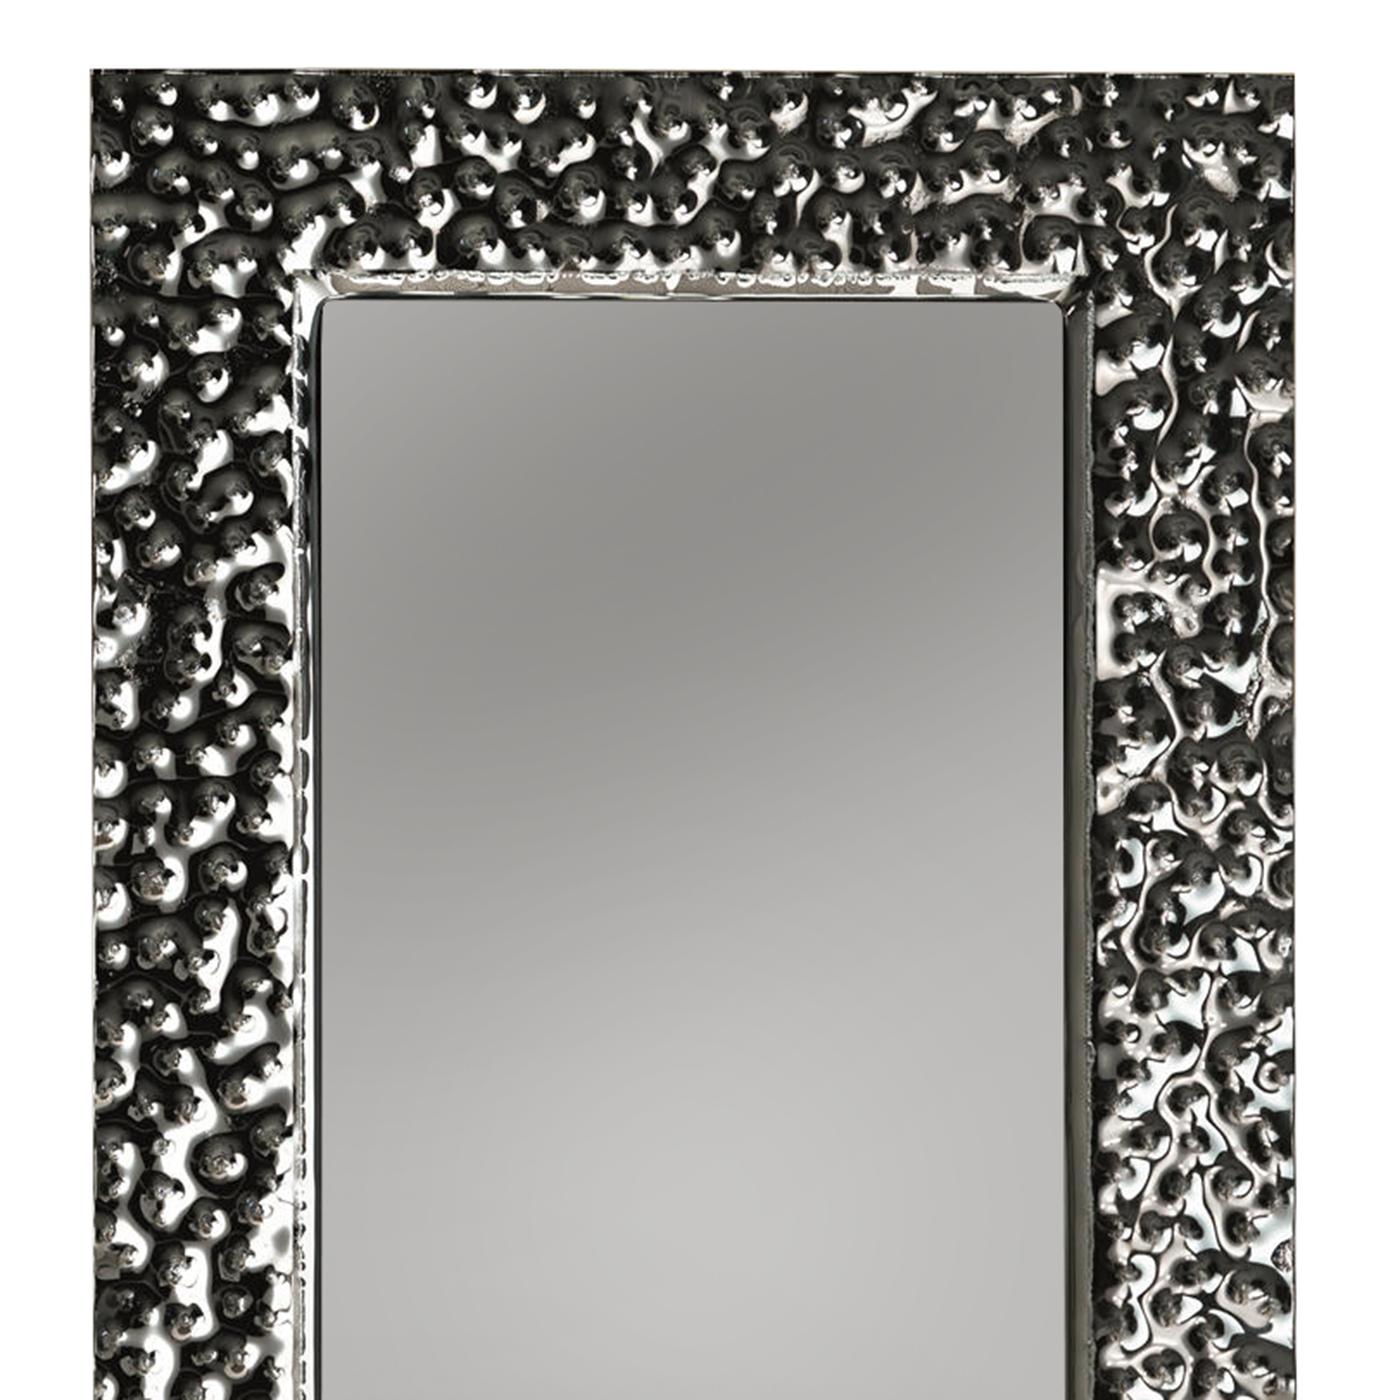 Mirror Mercury Rectangular with fused glass frame with back-silvered,
8 mm thickness. With glass relief ornament on frame, rear frame in
painted metal. With rectangular flat glass mirror, 5mm thickness.
It can be hung vertically or horizontally.